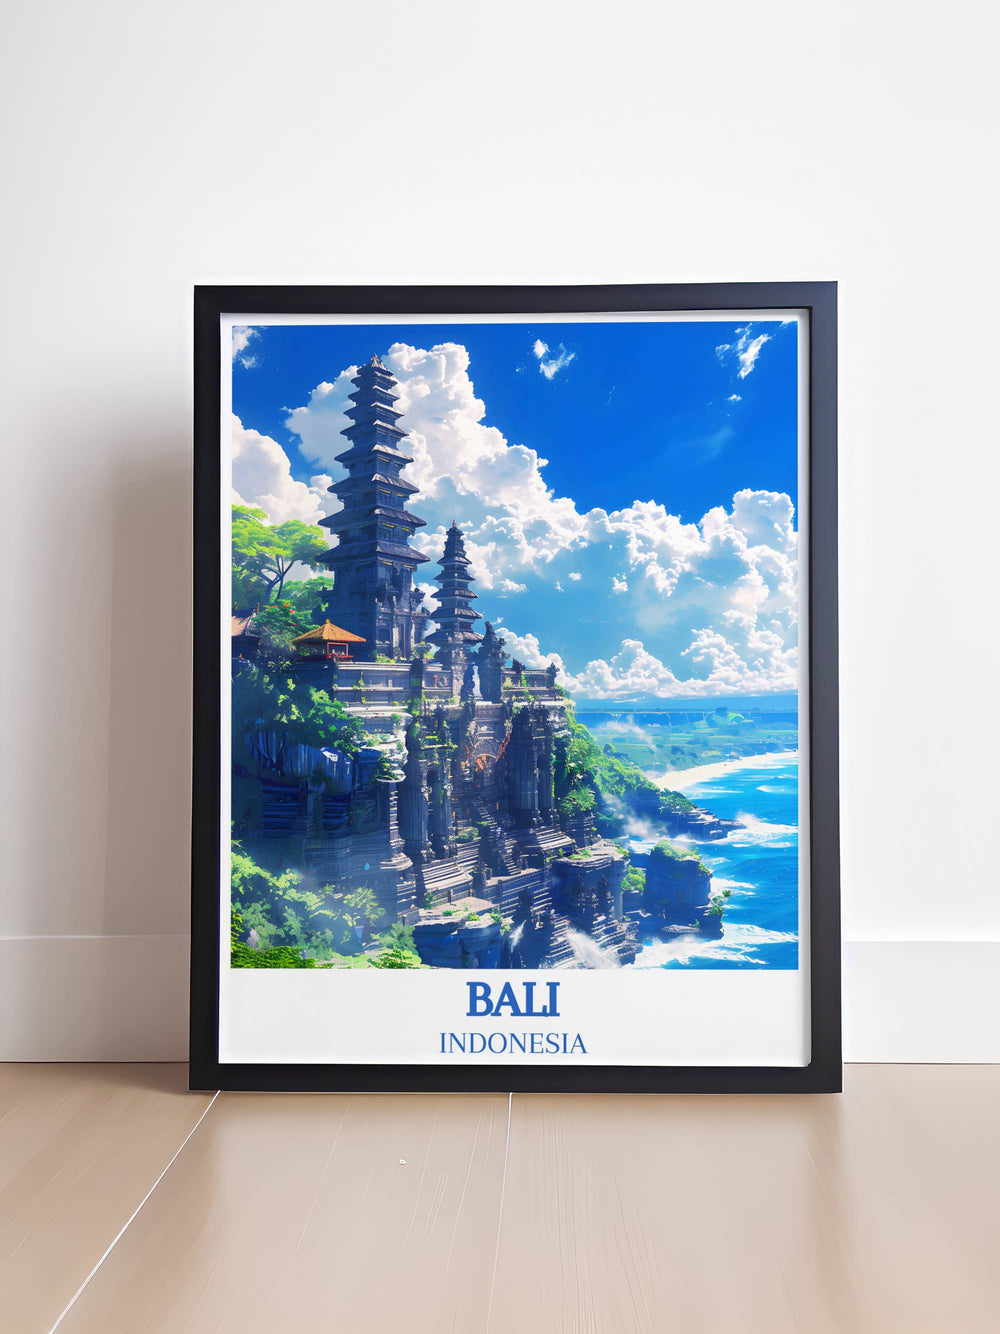 Tanah Lot Temple poster in black and white, highlighting the dramatic contours and spiritual essence of this iconic Bali landmark.